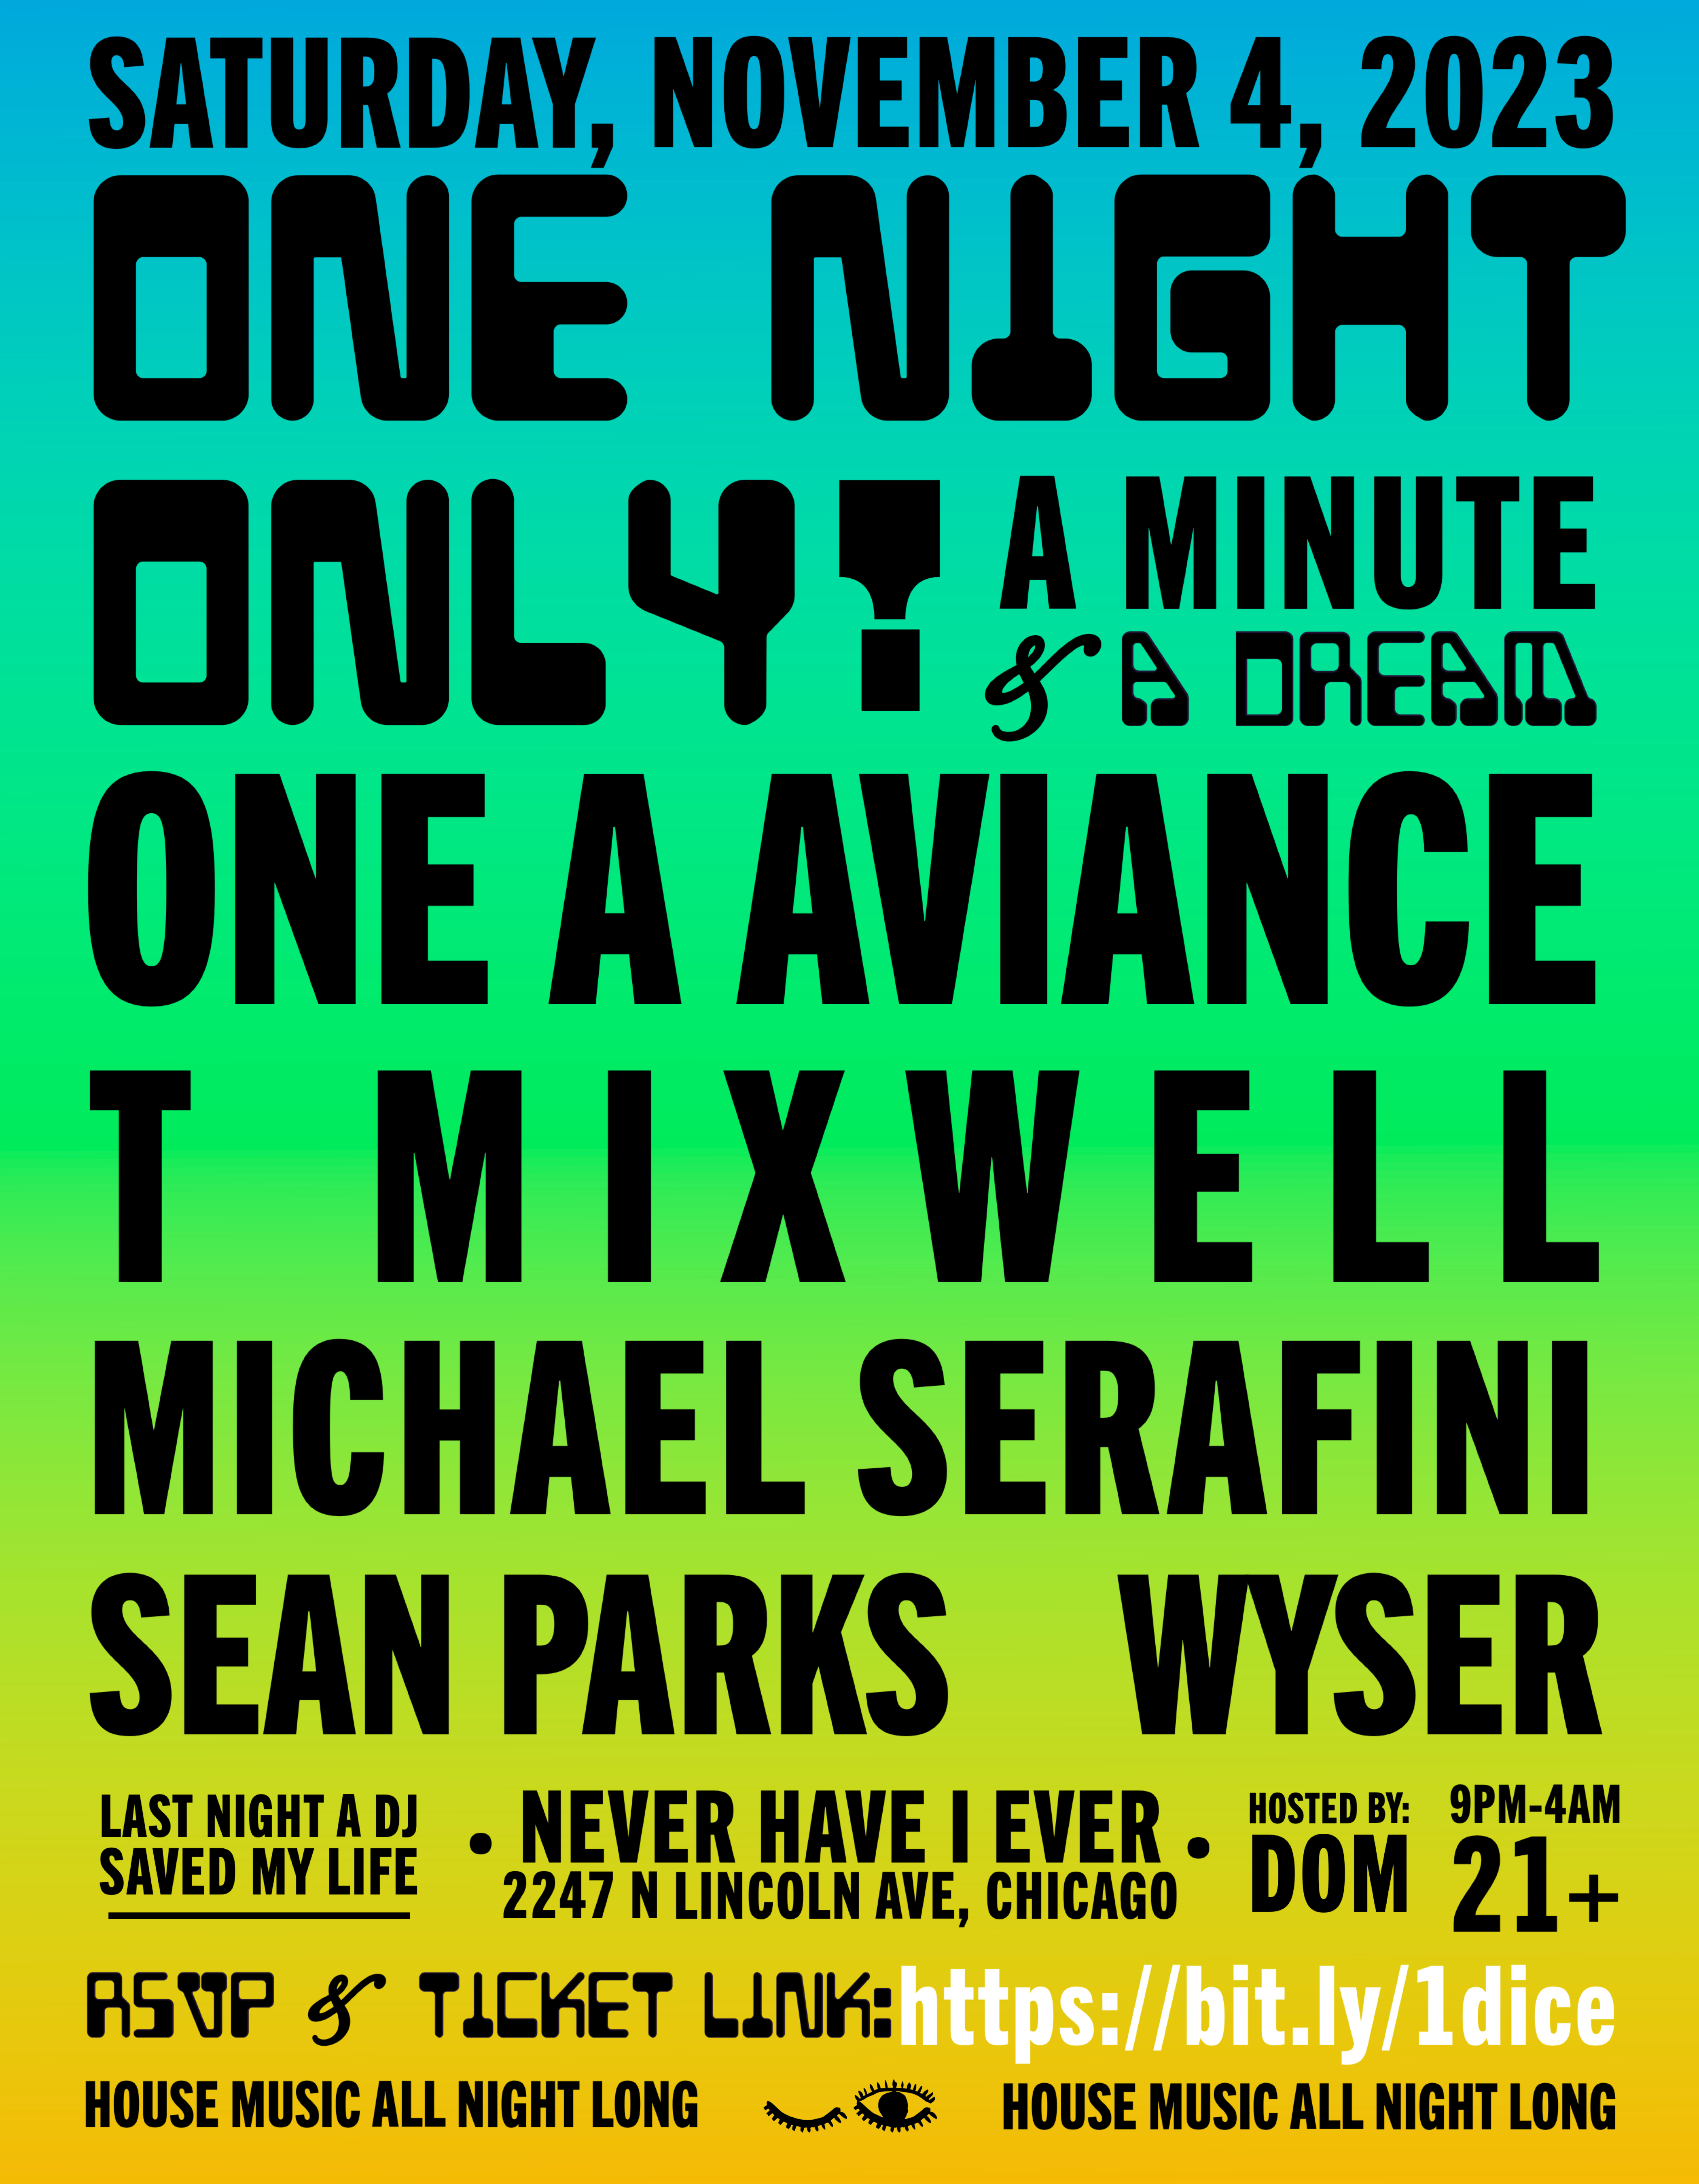 One Night Only! - 1A Aviance, T Mixwell, Michael Serafini, Sean Parks, Wyser - Página frontal